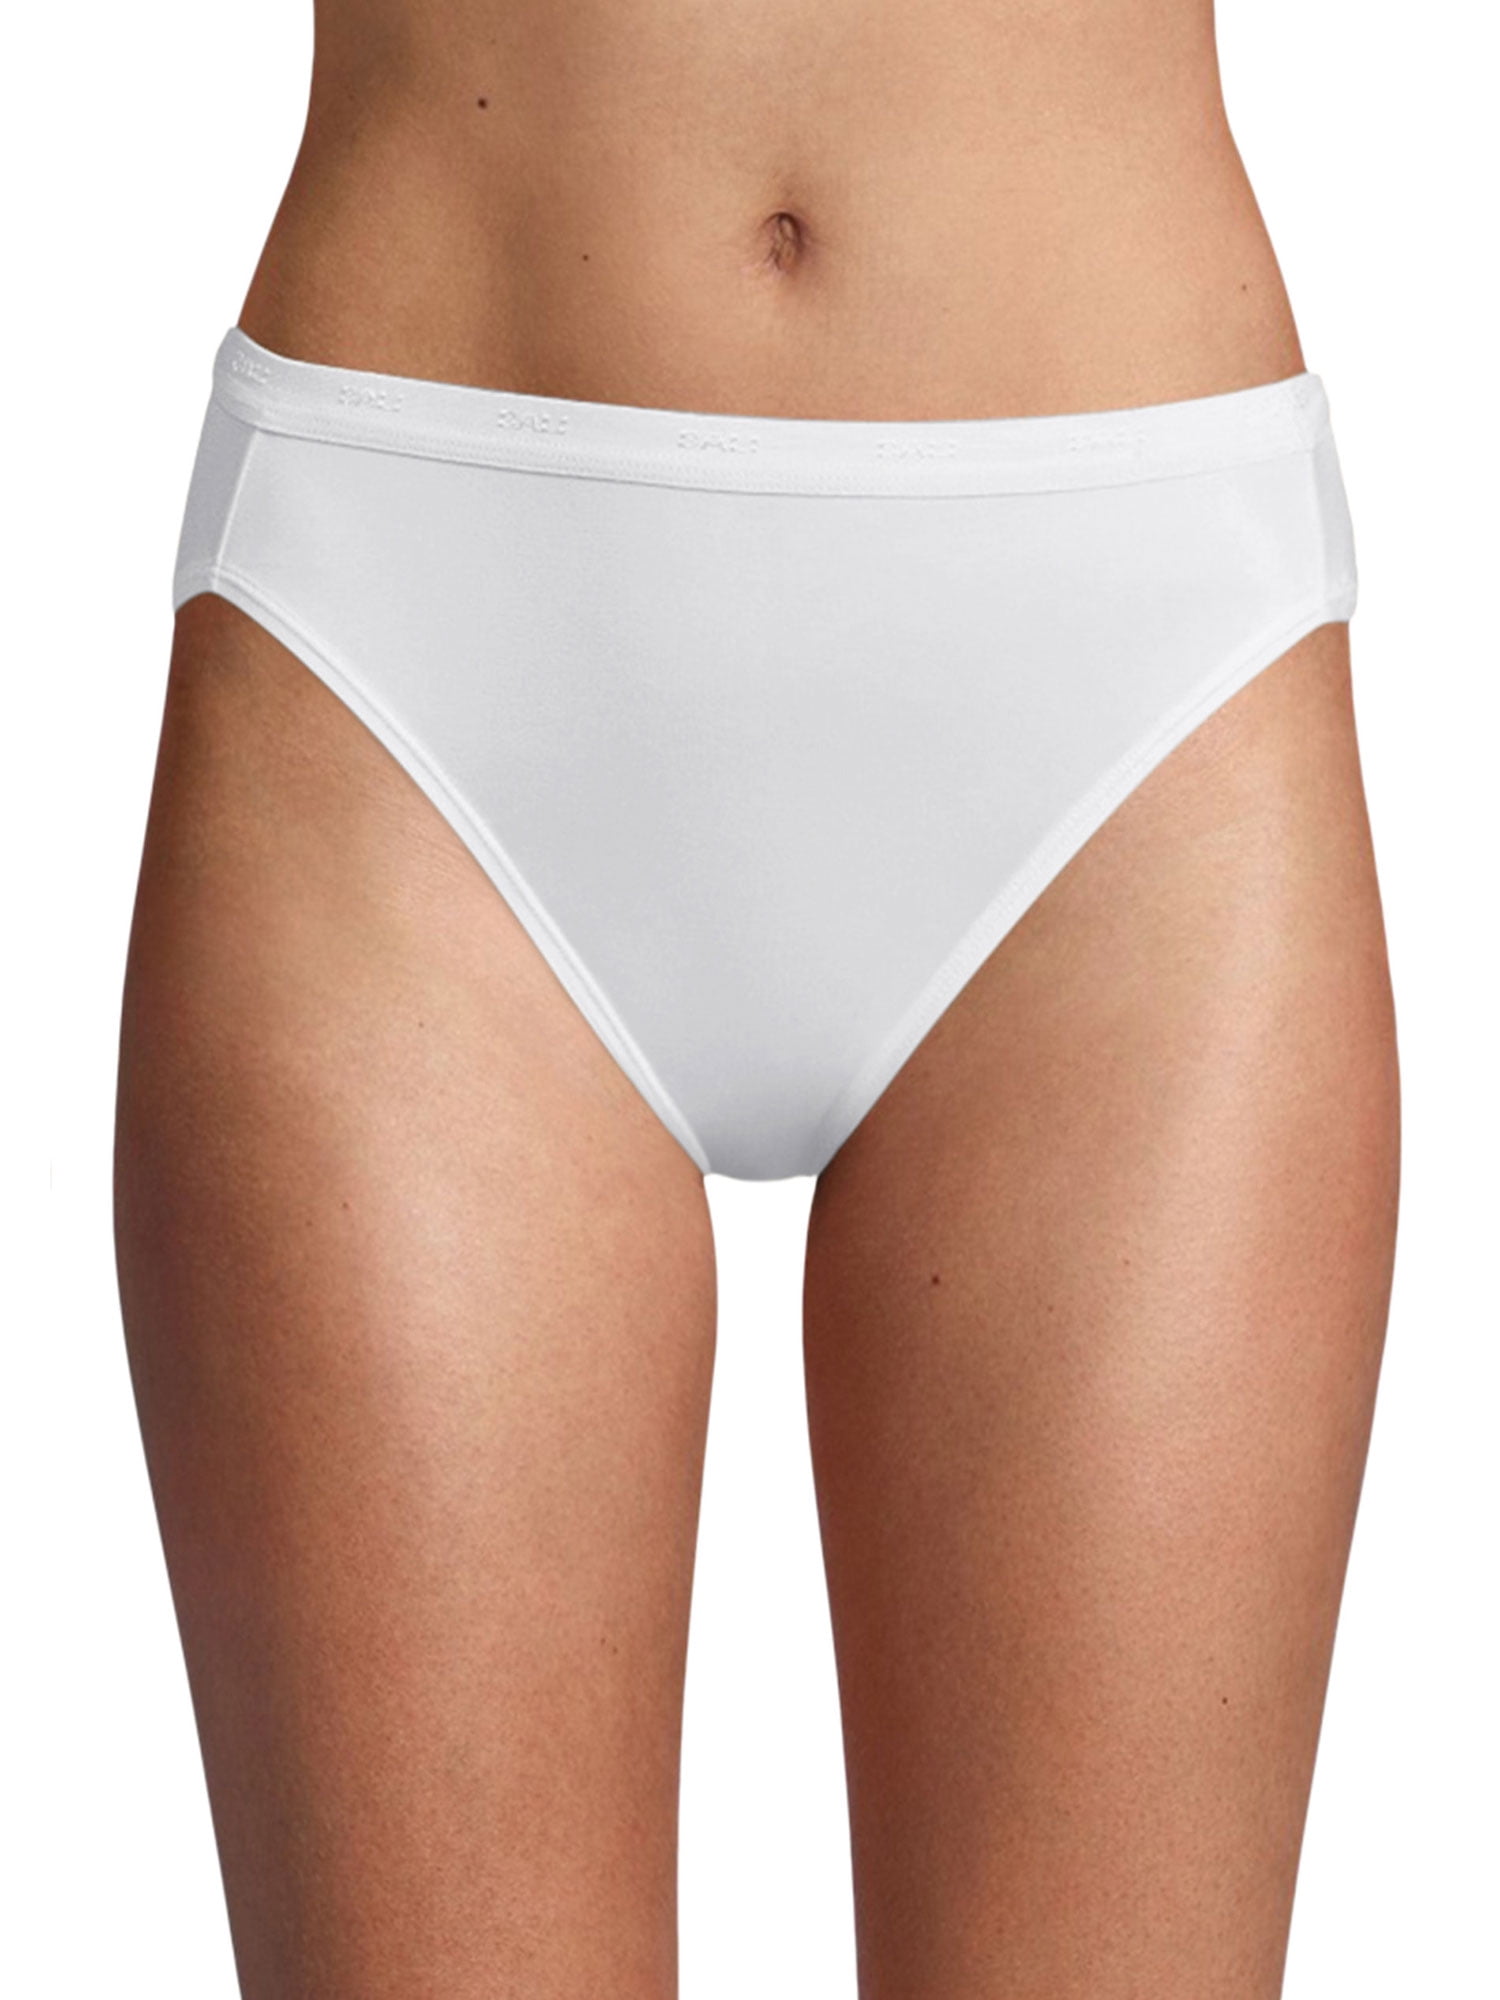 Bali Luxe Super Soft Stretch Cotton Briefs Panties with a Plush